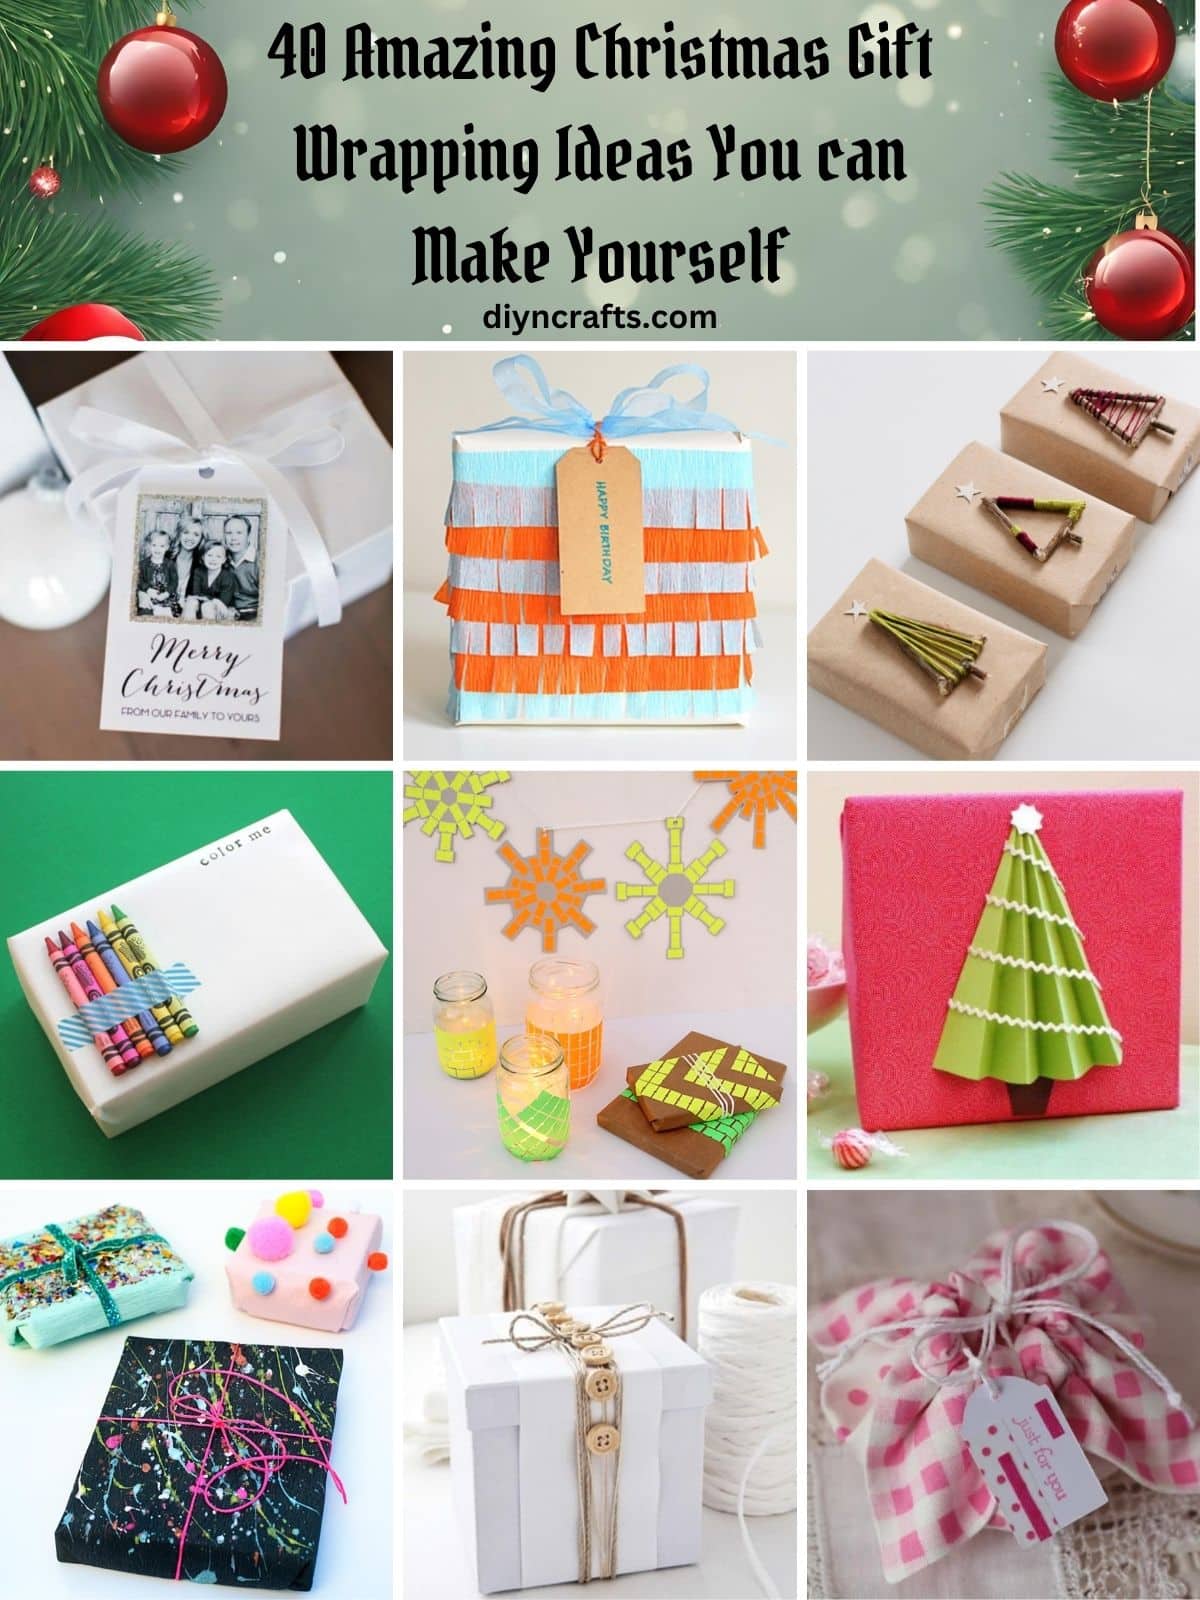 40 Amazing Christmas Gift Wrapping Ideas You can Make Yourself